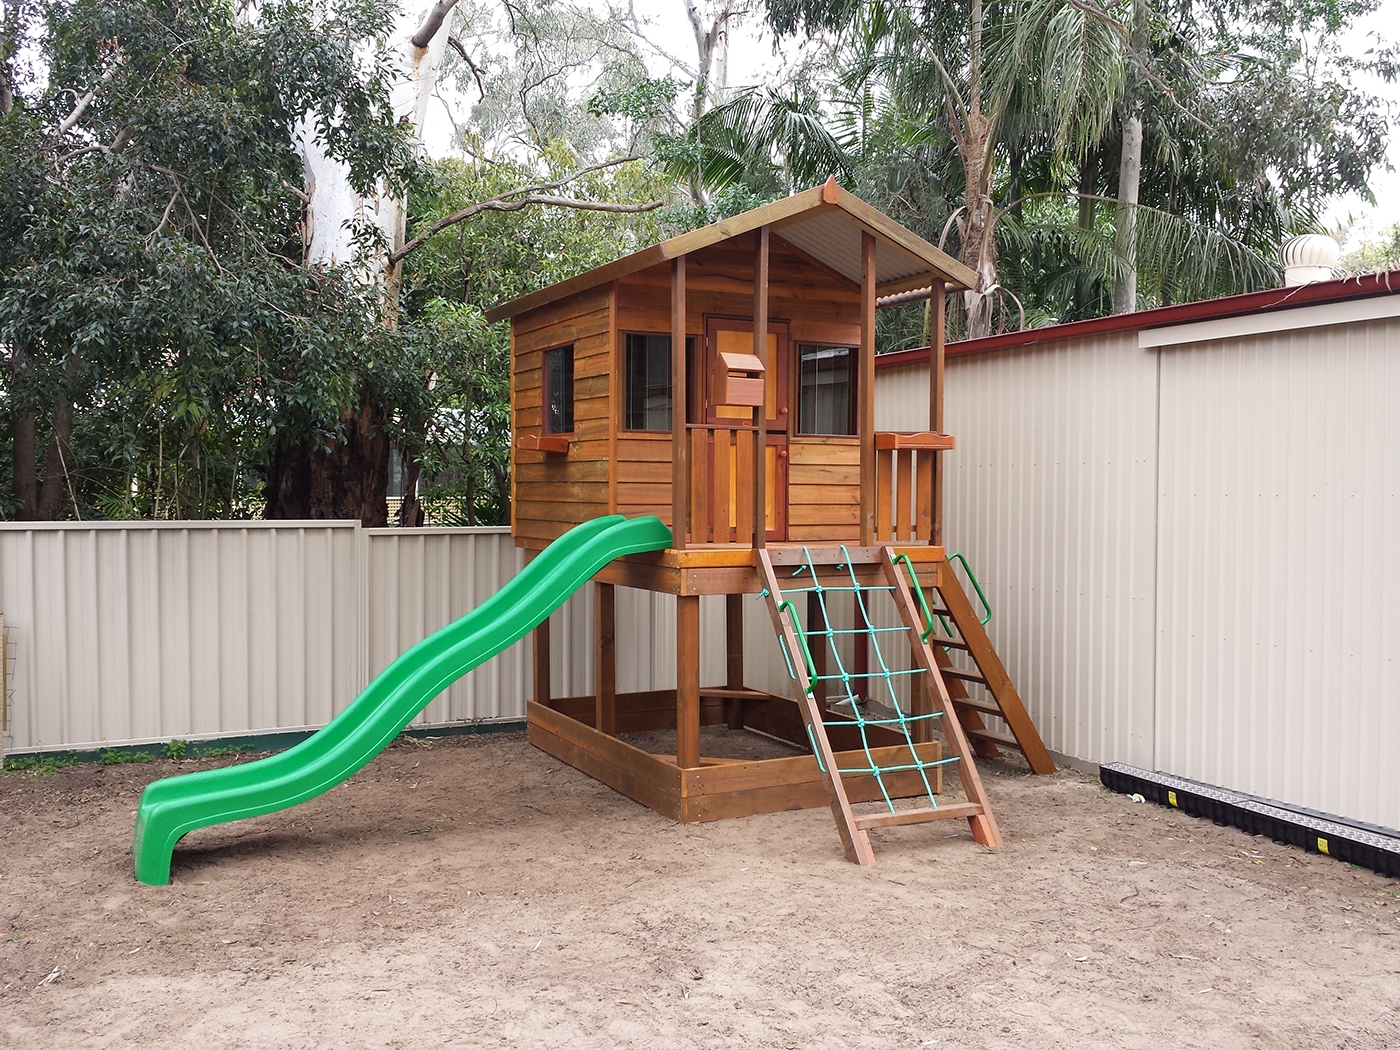 kids Cubby houses